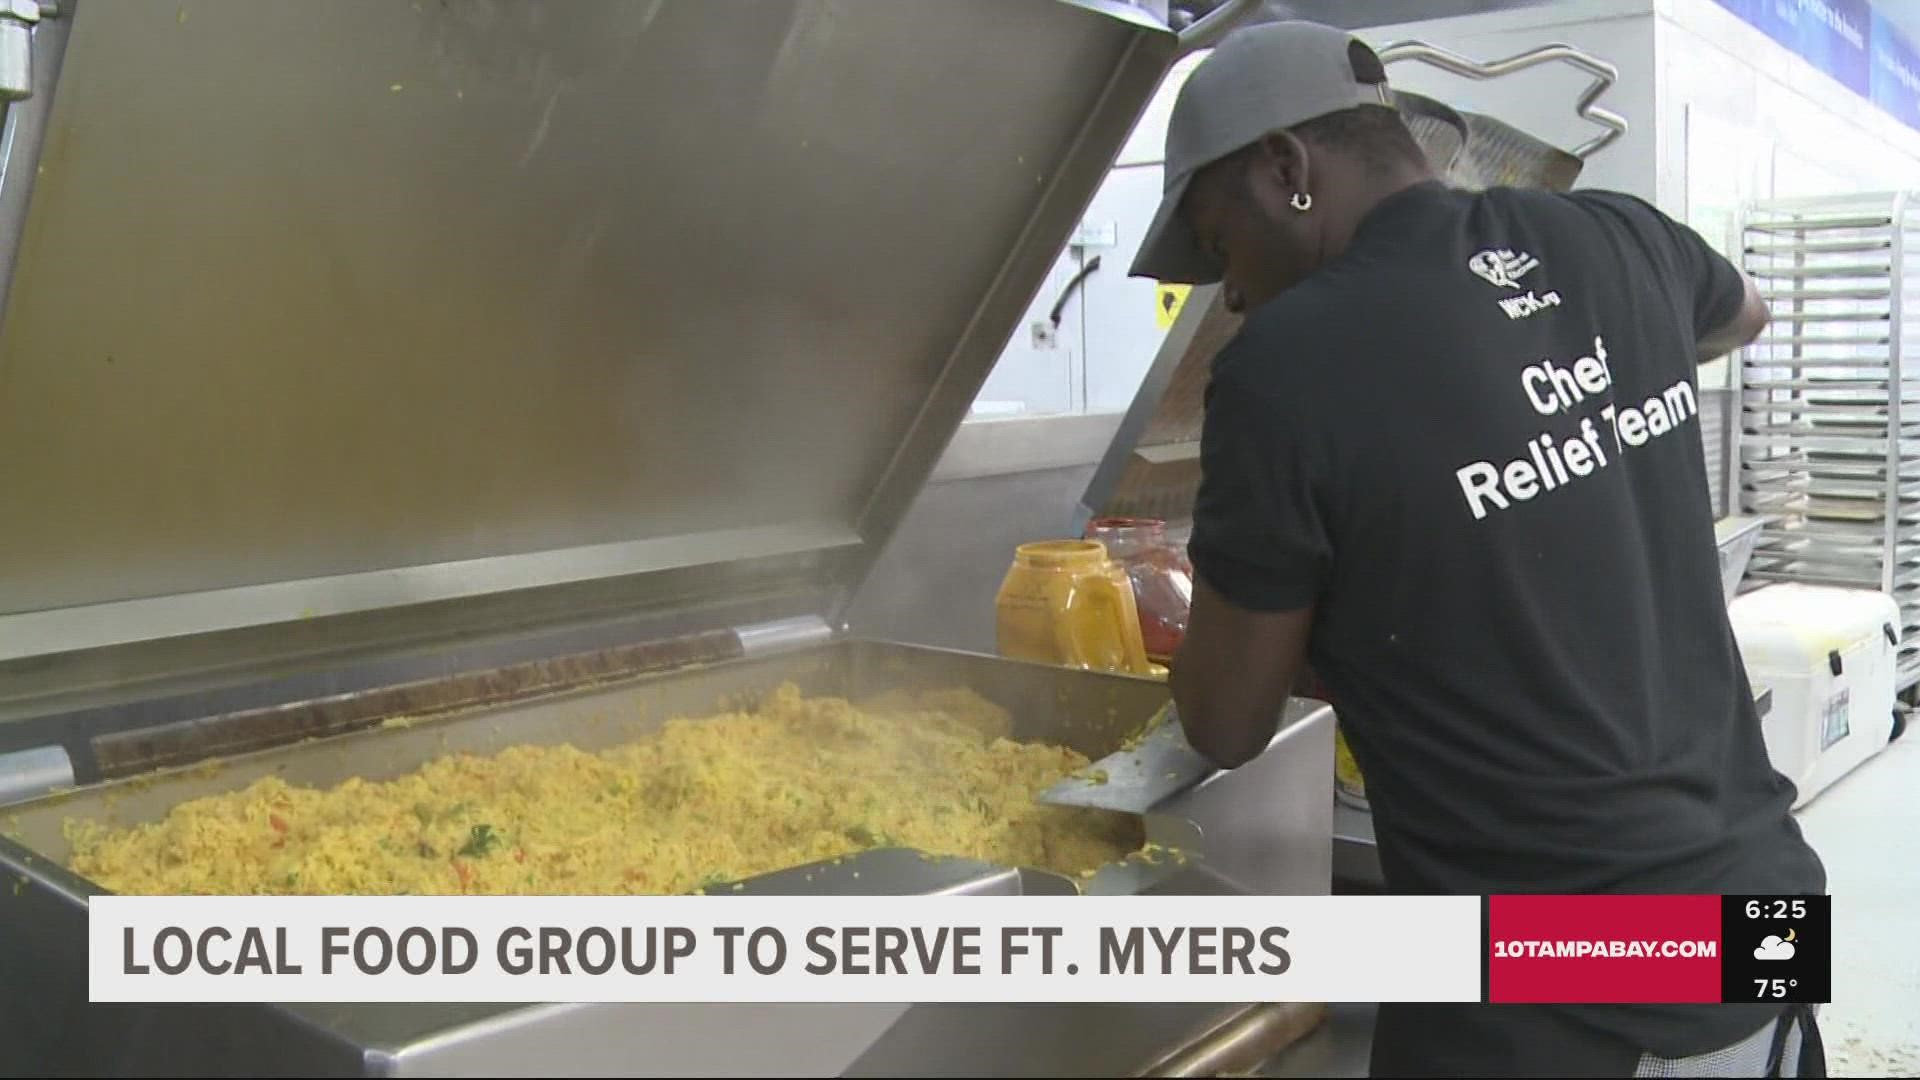 Metropolitan Ministries and World Central Kitchen team up to prepare thousands of meals each day.